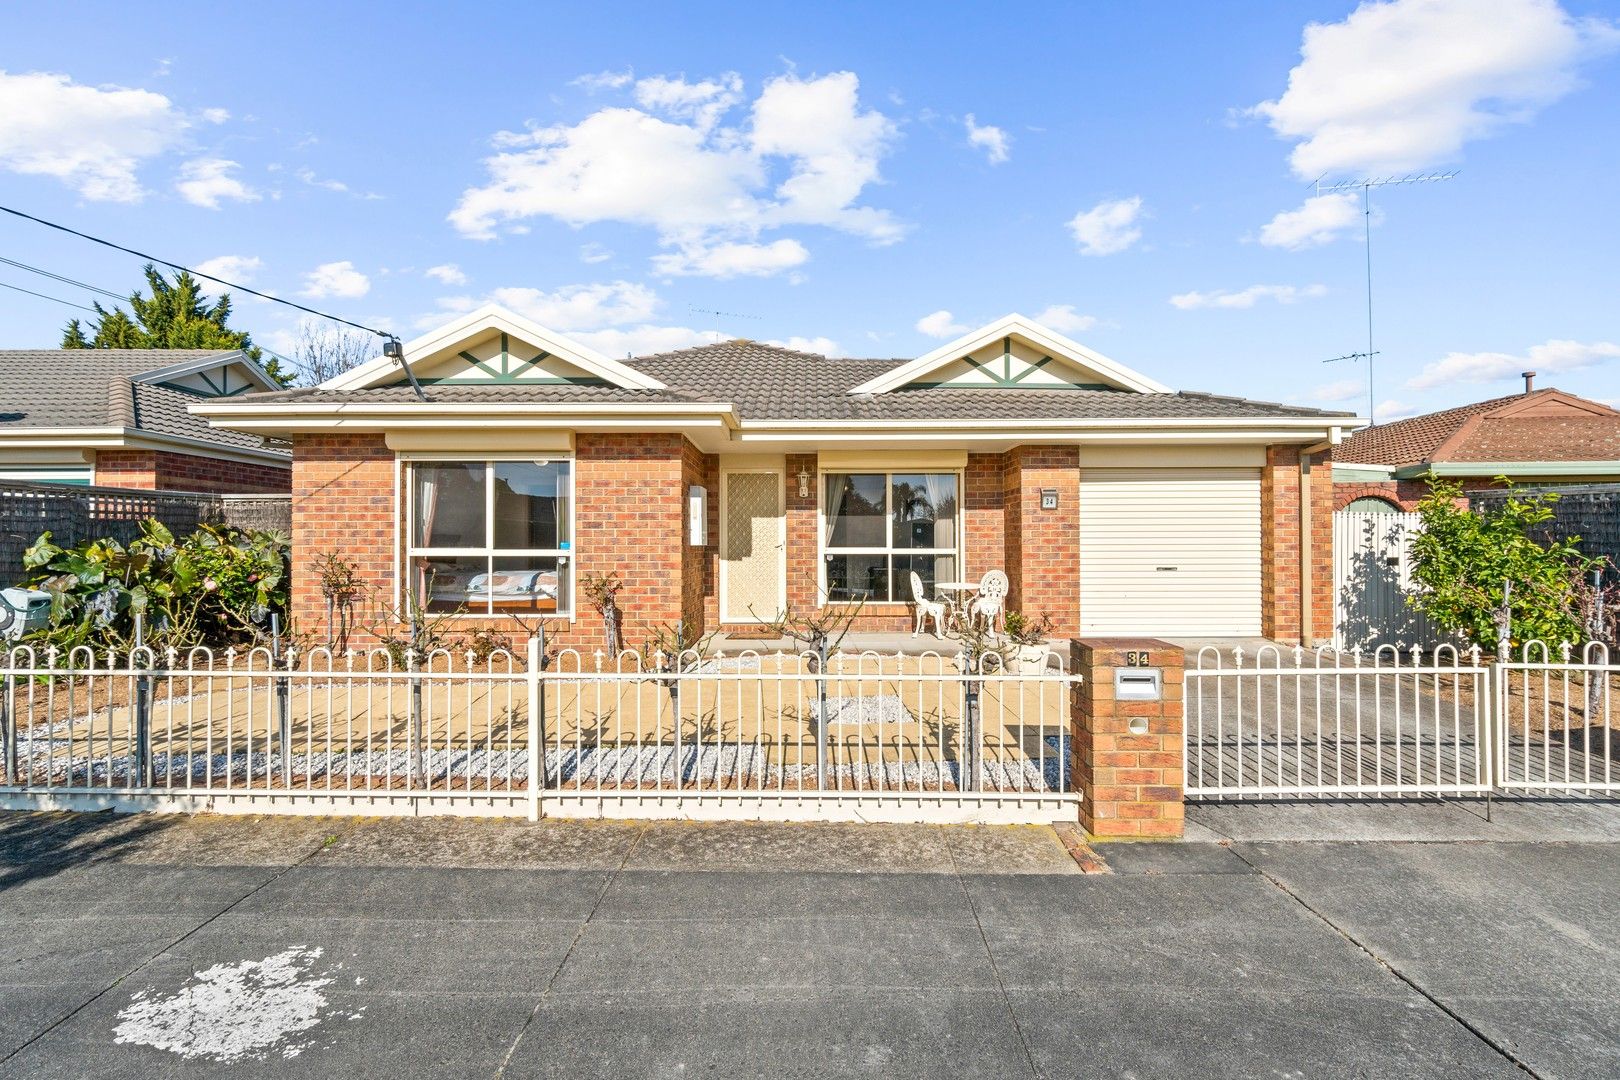 2 bedrooms House in 34 Tambo Crescent MORWELL VIC, 3840